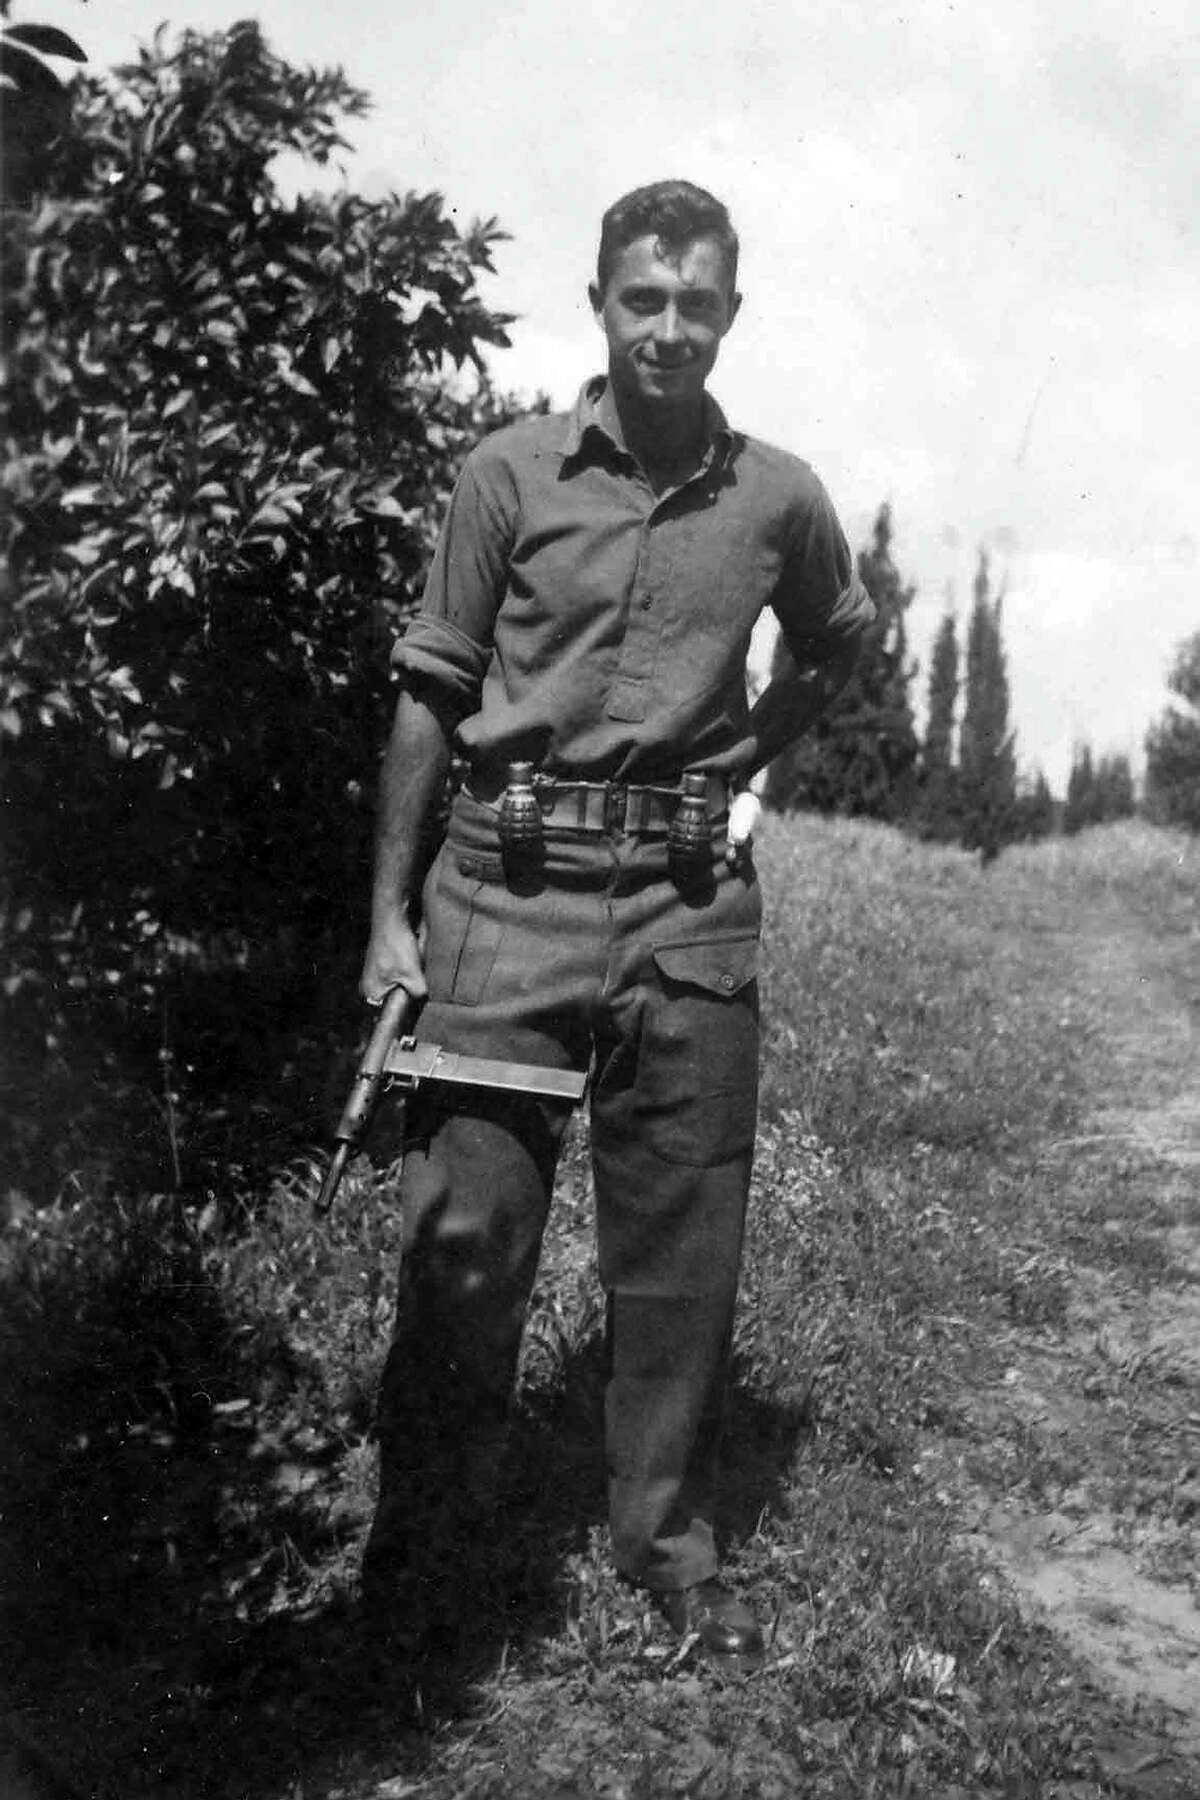 Ariel Sharon holds a Sten gun as a young commander in the Alexandroni Brigade of the fledging Israeli army during the War of Independence in 1948.